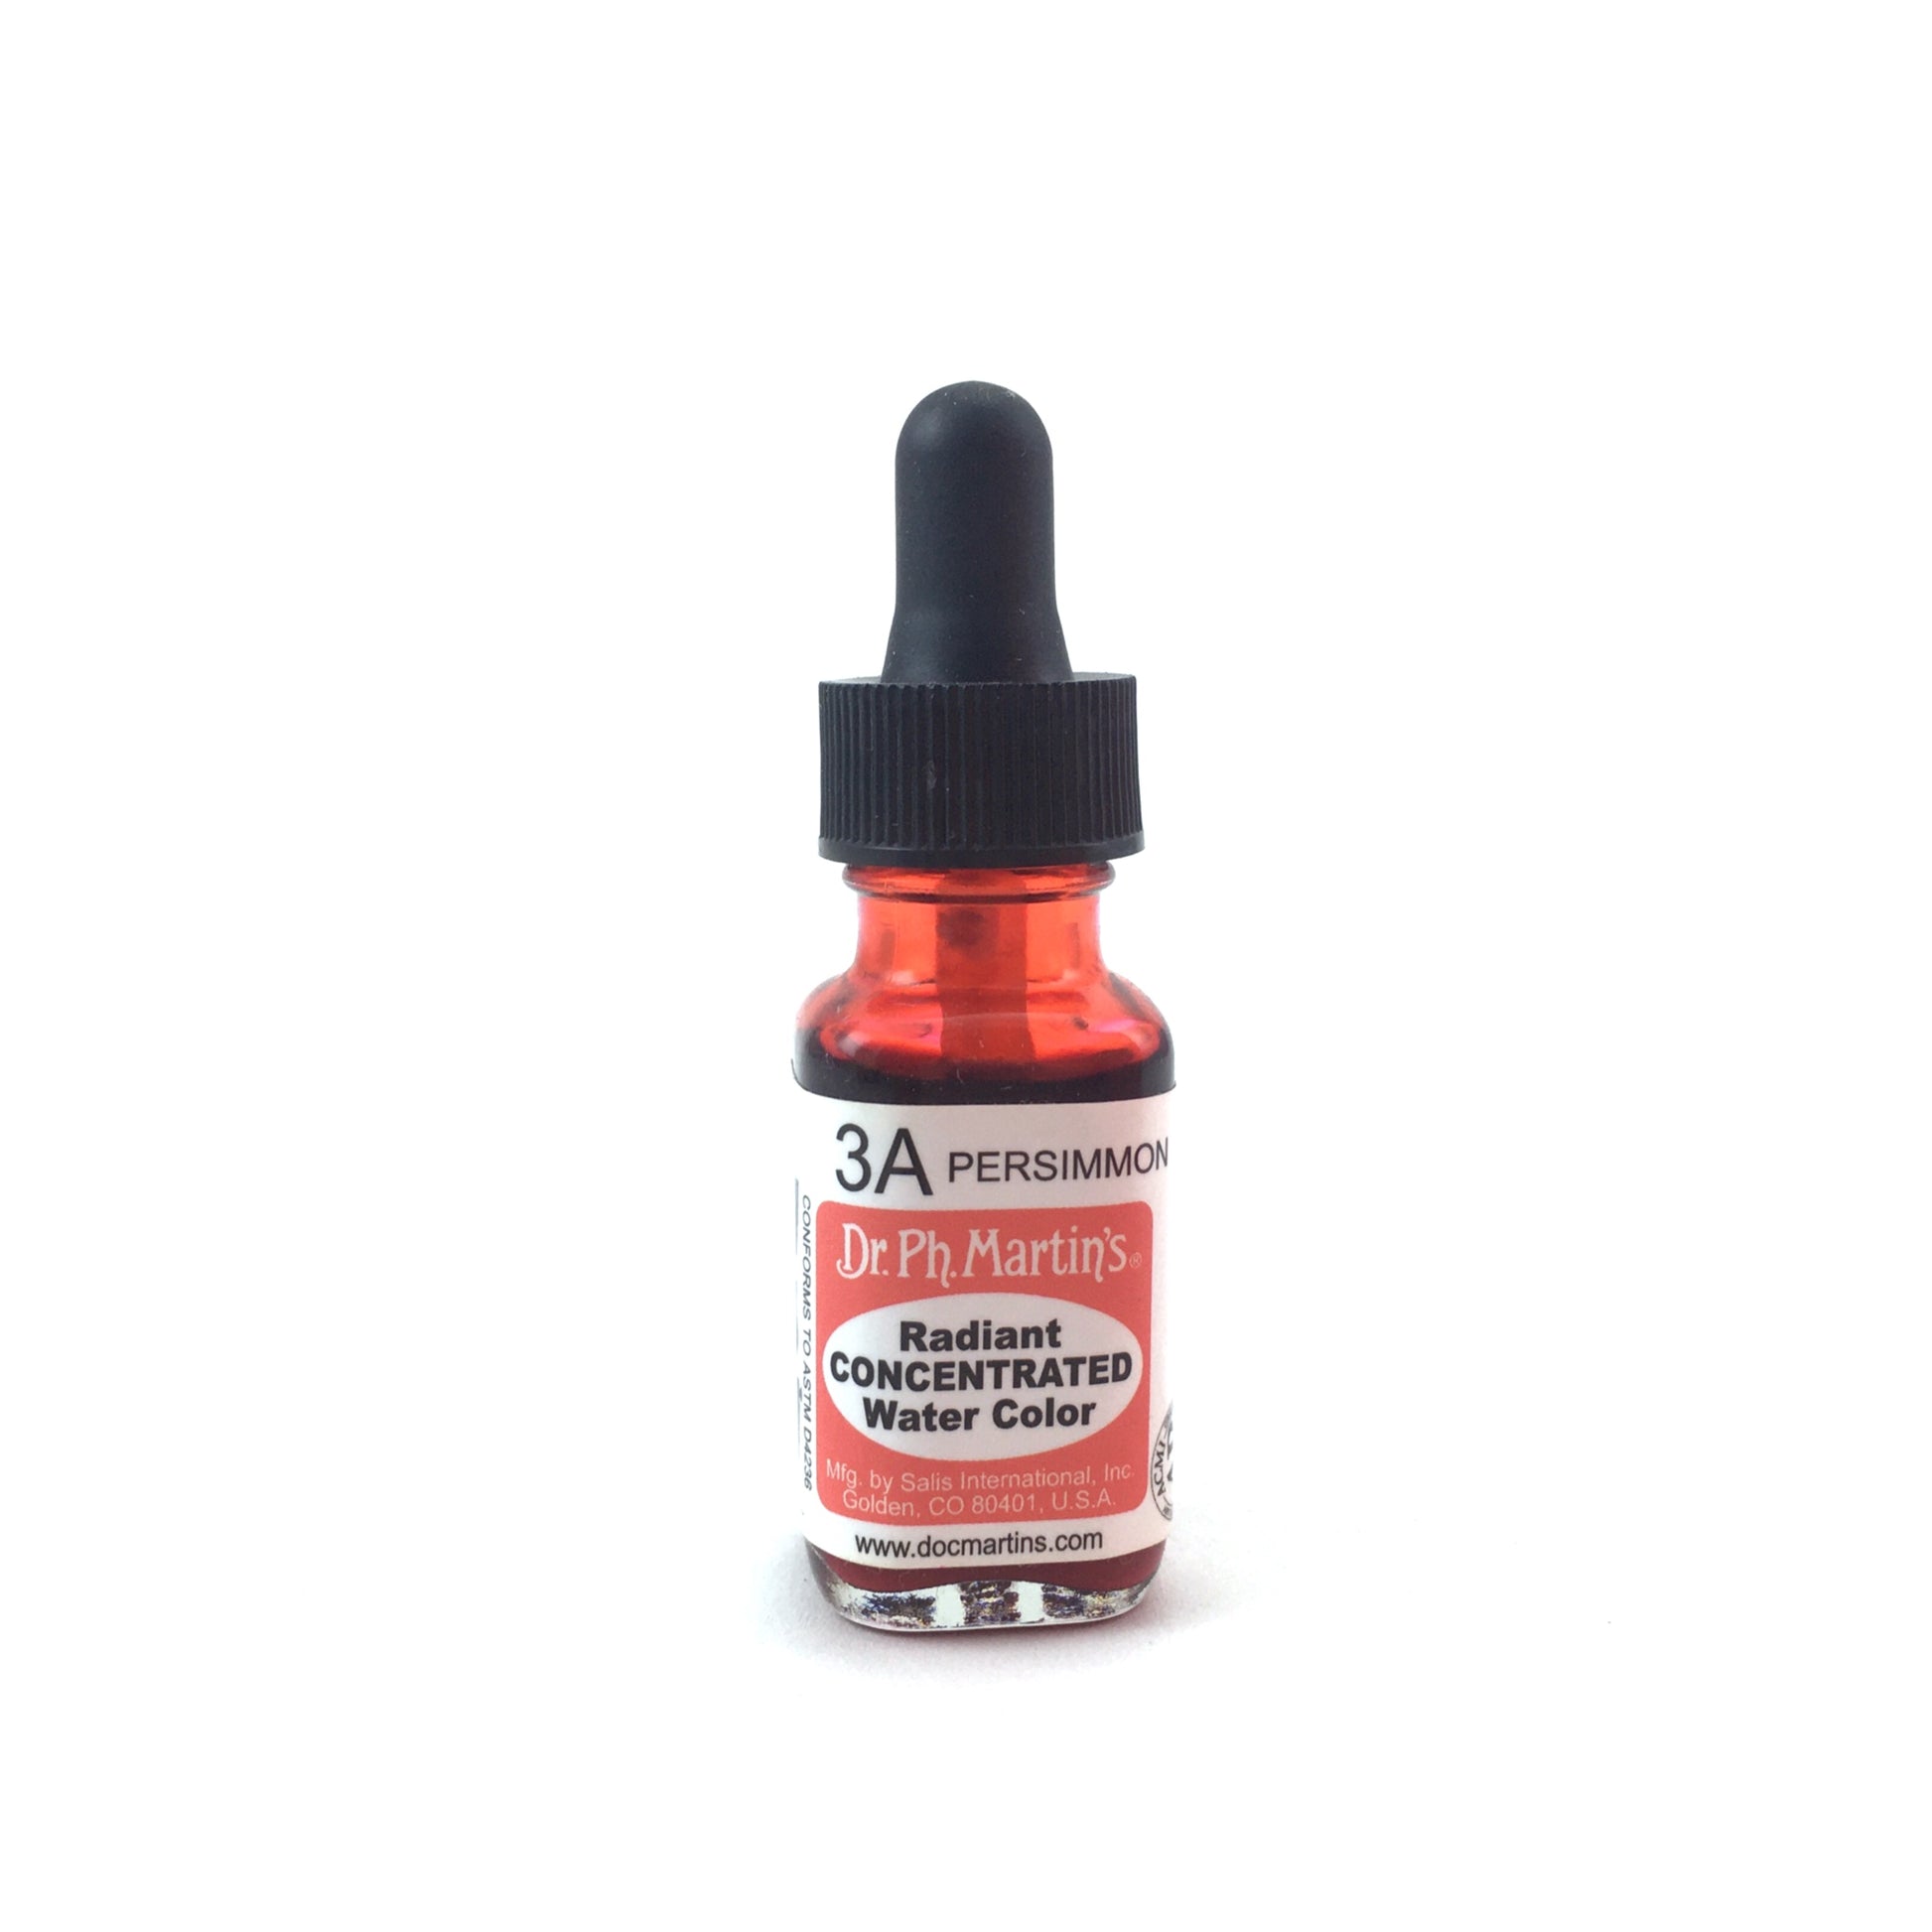 Dr. Ph. Martin's Radiant Concentrated Watercolor - .50 oz. - 3A - Persimmon by Dr. Ph. Martin’s - K. A. Artist Shop